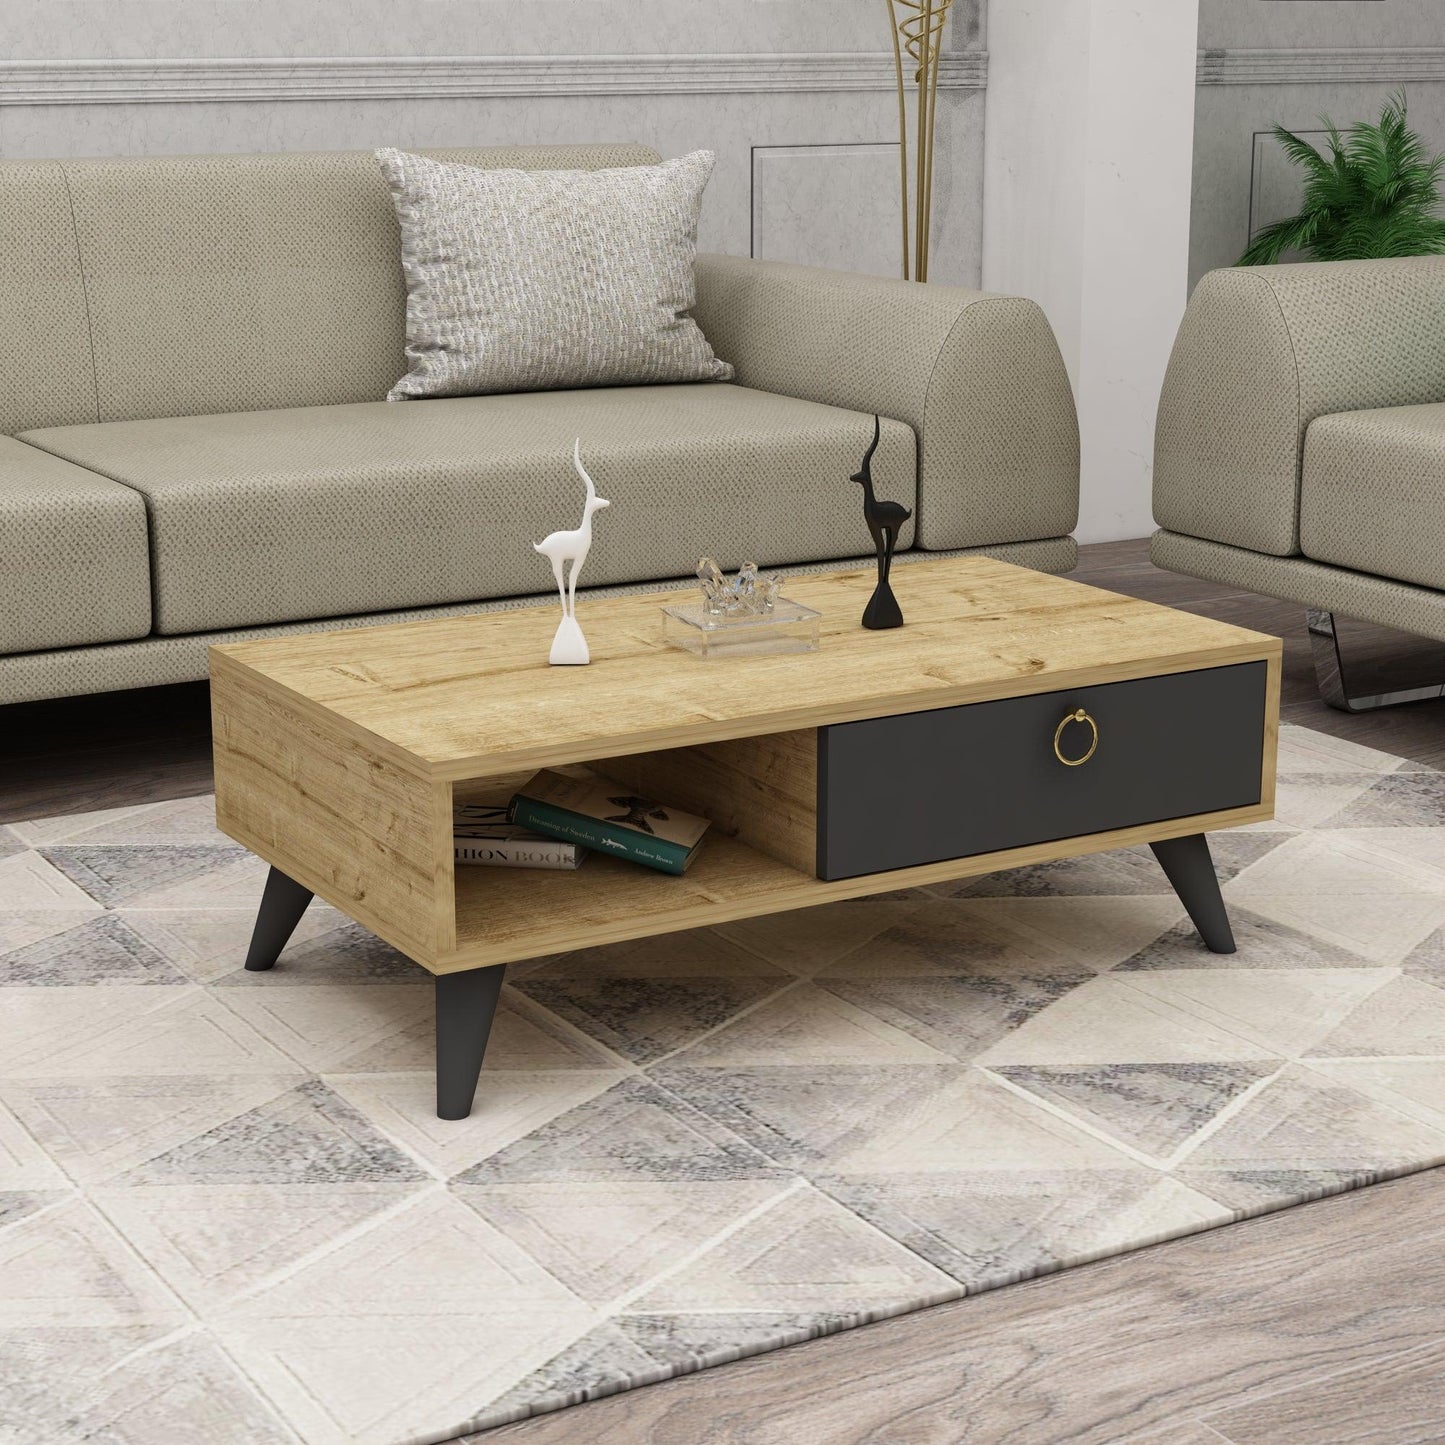 low table, coffee table, cocktail table, accent table, coffee table decor, coffee table styling